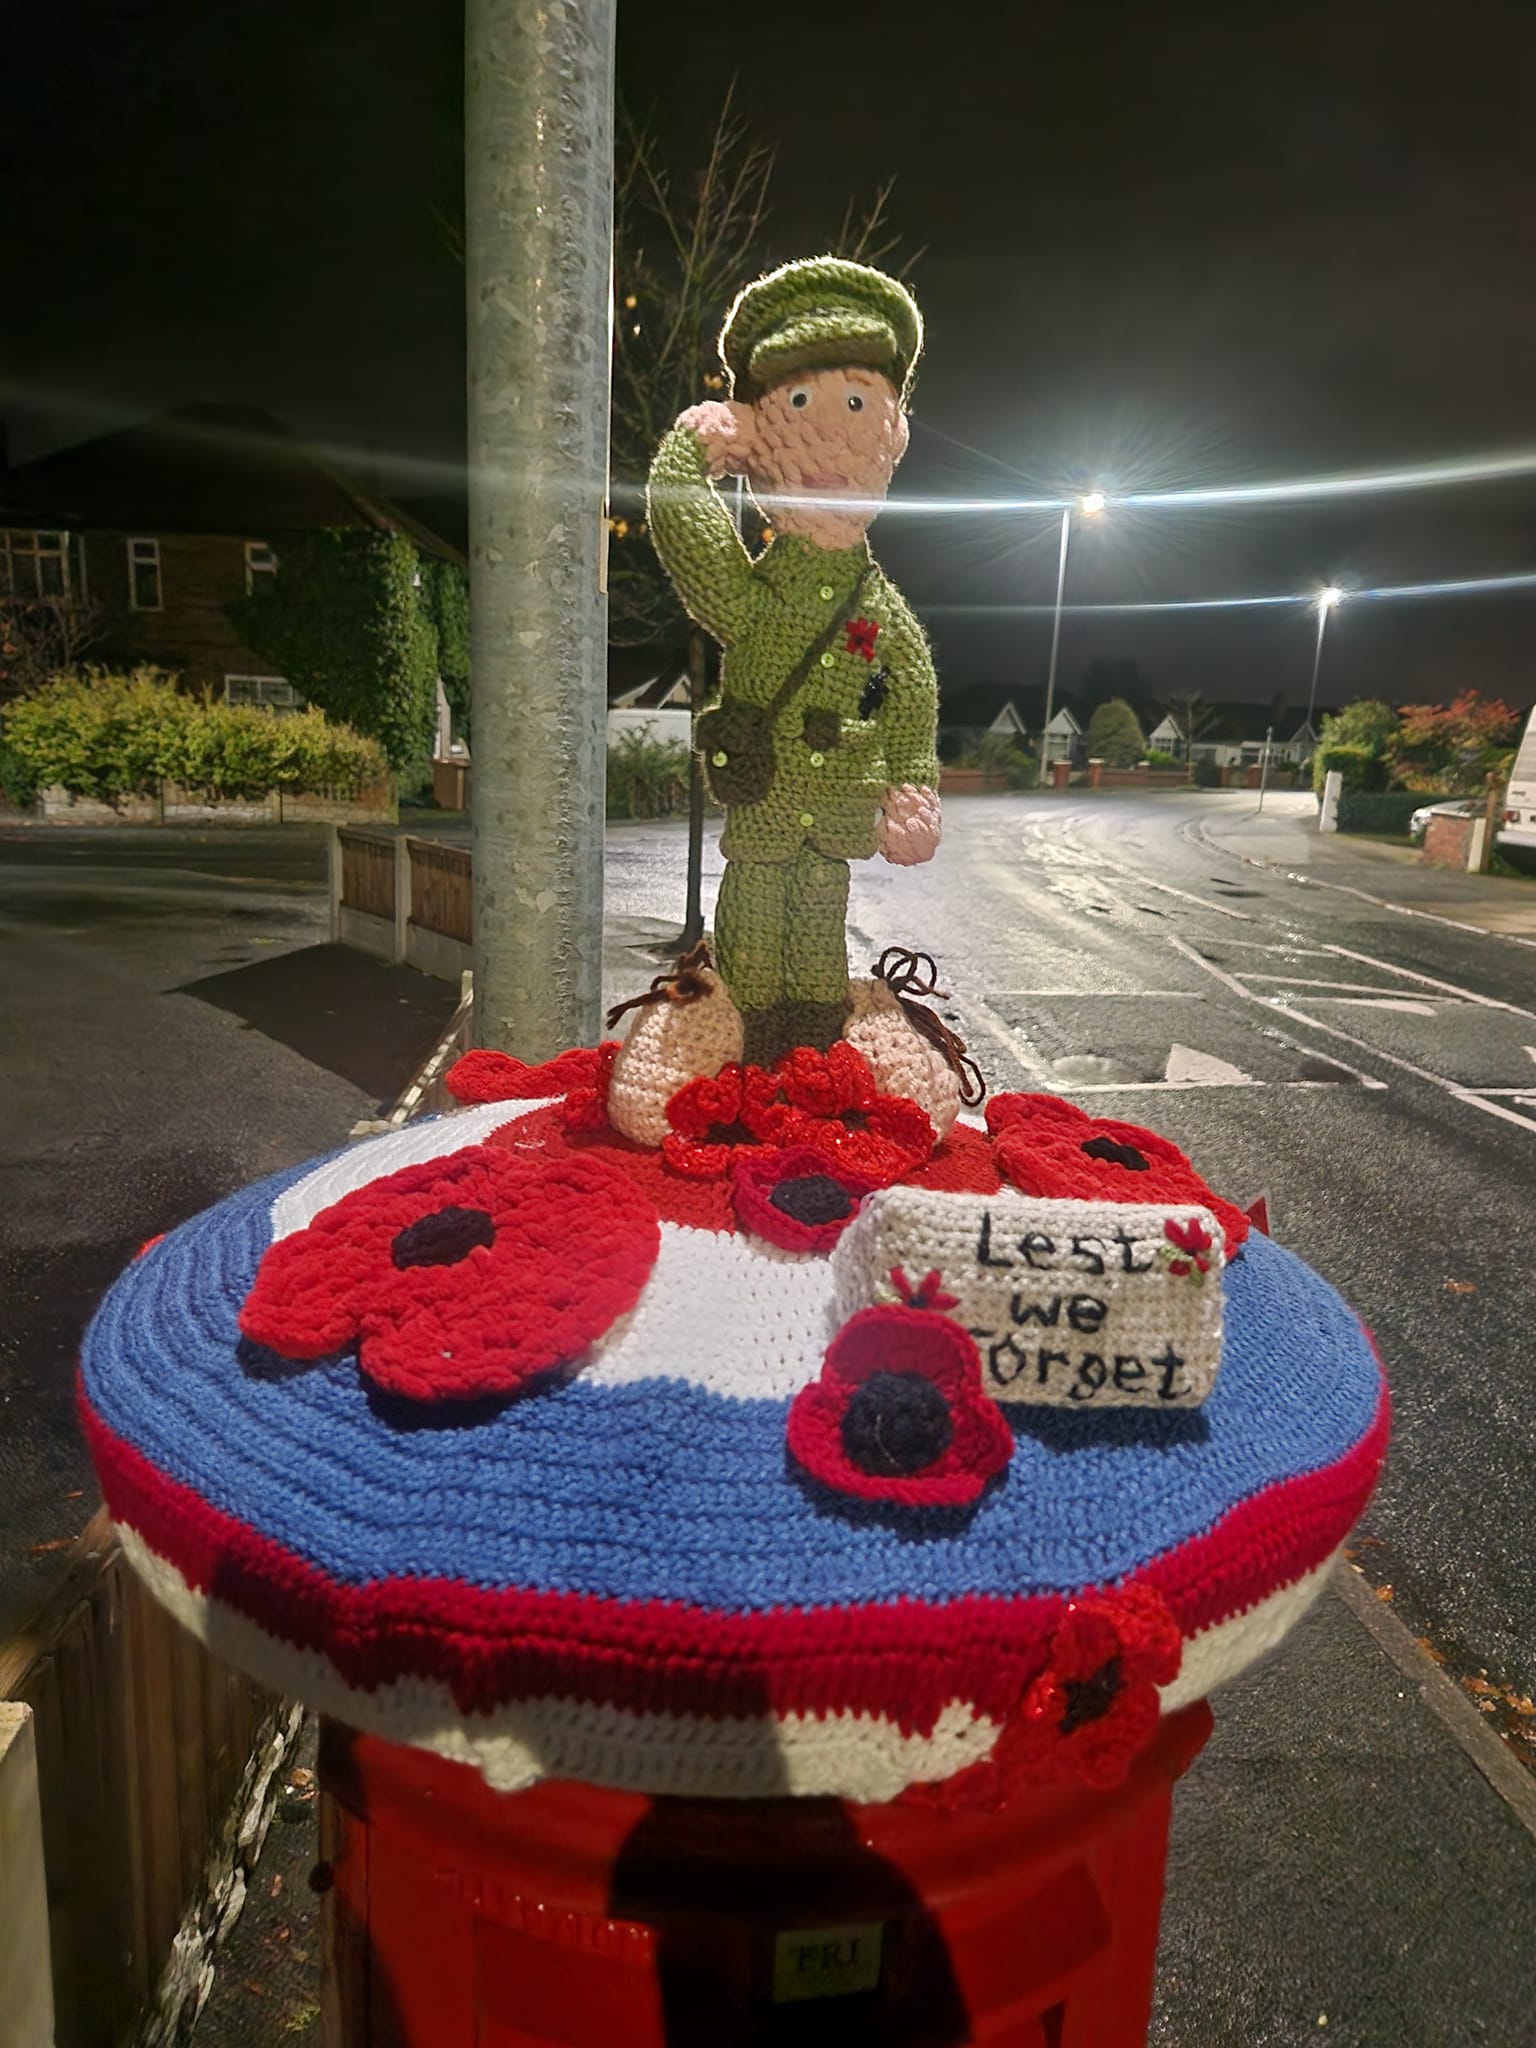 People in Southport are loving the new Remembrance themed toppers which have appeared in the town. The beautiful crochet work is the work of the new Southport Hookers group, whose members have been creating some really eye-catching work locally. Their latest work has seen some moving Remembrance postbox toppers in Churchtown, Crossens and Banks dedicated to those who have served their countries, ahead of the Remembrance services taking place in the town this weekend. Read More: Southport Remembrance details revealed as public invited to support veterans A Southport Hookers spokesperson said: “We love them! We have been planning the Remembrance toppers since September. “It has been a real team effort. Each topper has been worked on by at least five of our members. “We have played to each others’ strengths and have learnt a few new skills along the way. “Hopefully next year we will be able to go bigger and better! “We have been overwhelmed by the reaction to our toppers, we have had so many lovely messages and knowing that they raise a smile or two really keeps us going. “The postboxes we have chosen to cover are located near to where our members live. “So if you can see a postbox topper it means that there is a Southport Hooker nearby. “If you are interested in learning to crochet or if you are already an avid fan and would like to meet like-minded people, please contact us via our Southport Hookers Facebook page. “We do more than just postbox toppers and would love to welcome new members.” The postbox toppers have wowed local people. Speaking on the Southport Hookers Facebook page, Chris Watkinson said: “They are brilliant.” Debra Moore said: “Love the one in Crossens. Thank you so much.” Meryl Birchall said: “Love the one in Banks, thank you so much, you are so talented.” Bev Alderson said: “Beautiful, lest we forget.” More acts of subterfuge are being planned in the coming days, including outside a well-known care home in Southport. Southport Hookers members meet every Sunday at a secret location in Southport, with new people invited to get involved. All they need is bags of enthusiasm, bags of knitting and a desire to carry out random acts of kindness across the community. Do you have a story for Stand Up For Southport? Do you need advertising, PR or media support? Please message Andrew Brown via Facebook here or email me at: mediaandrewbrownn@gmail.com 